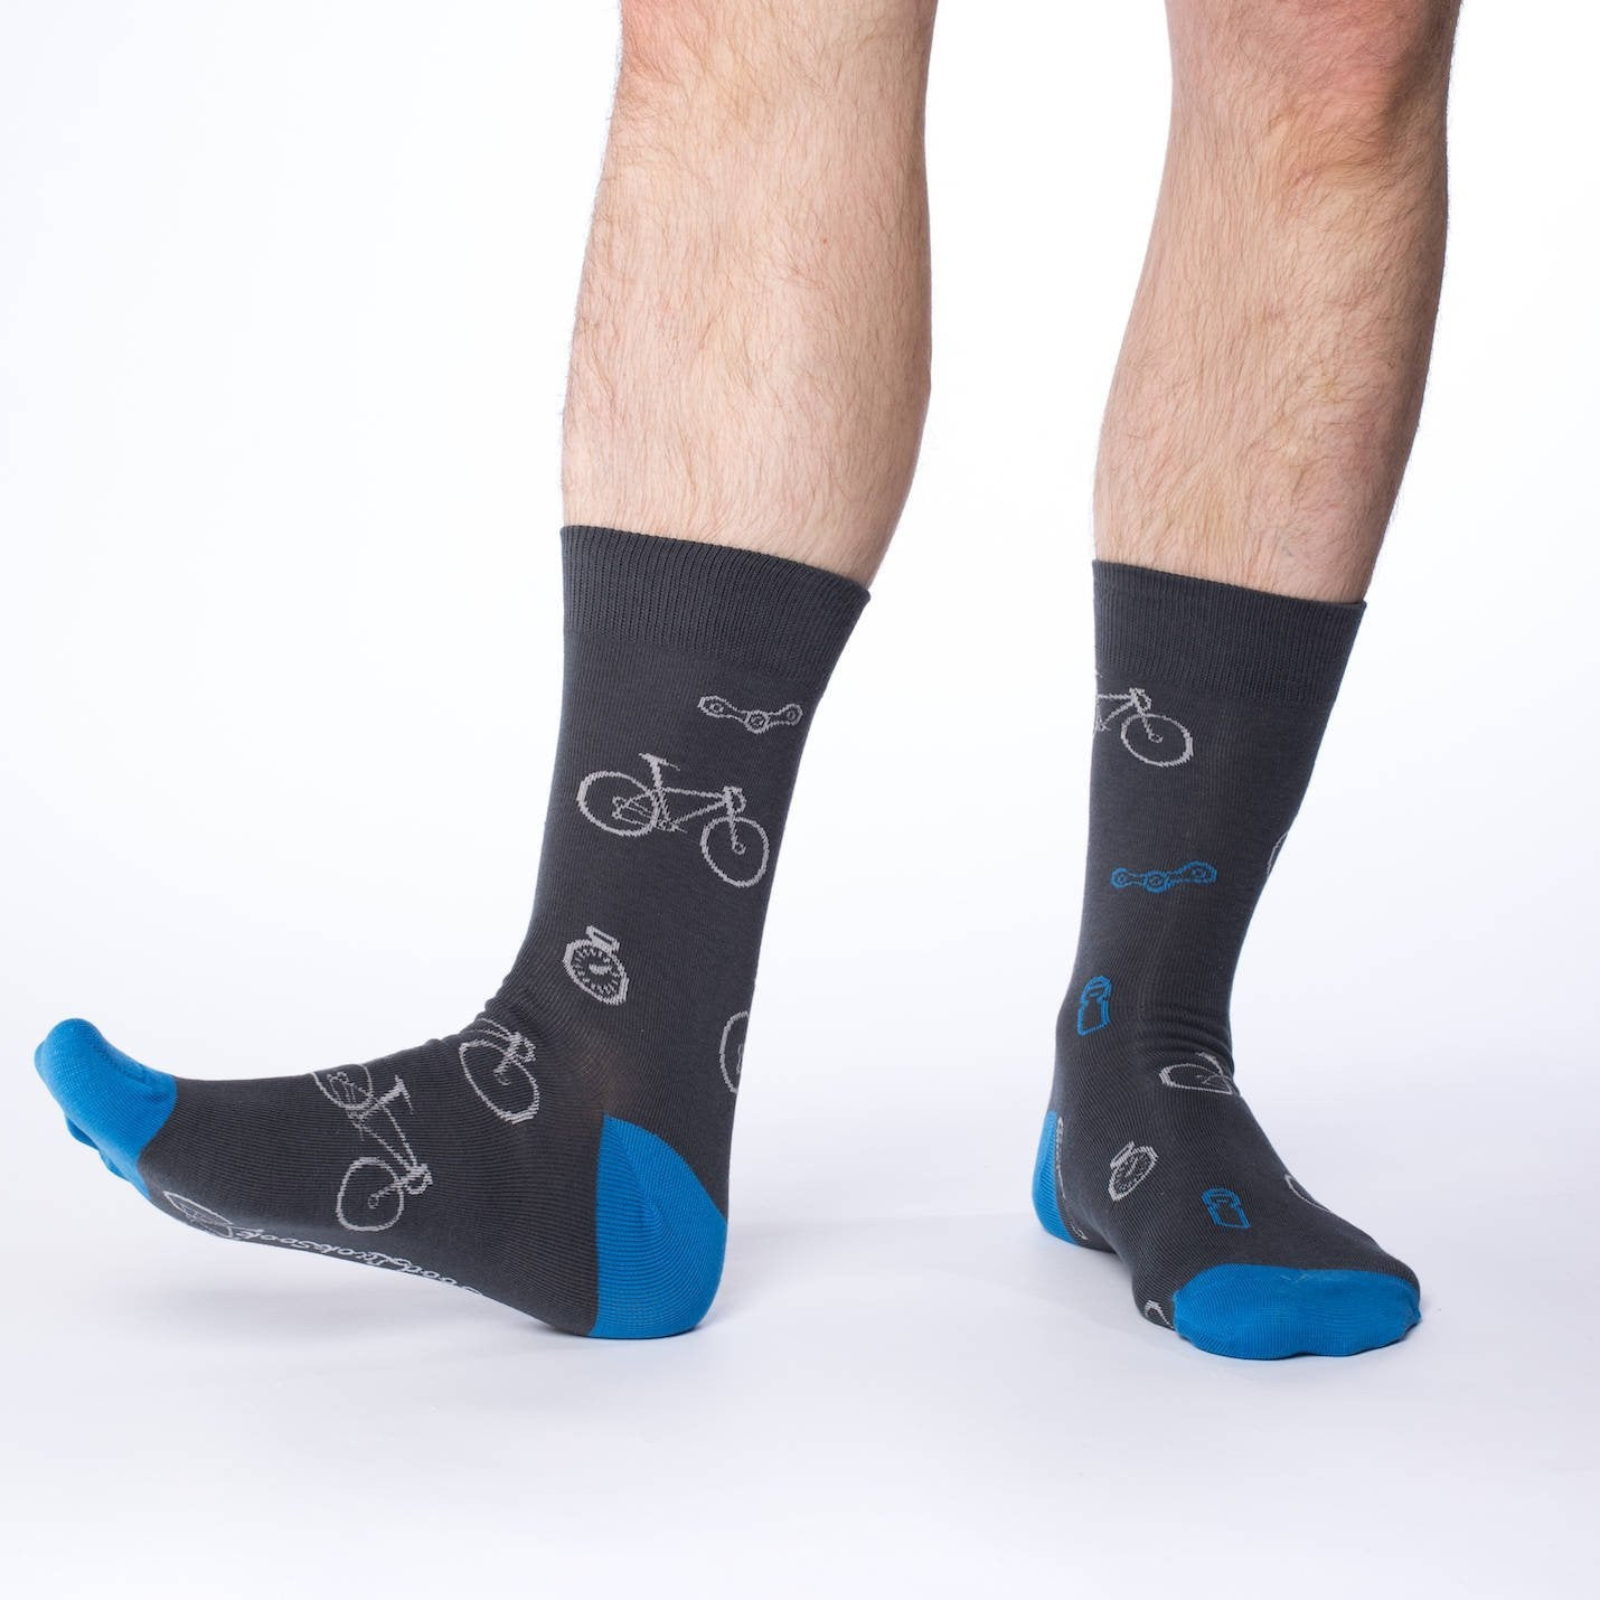 Good Luck Sock Blue and Grey Bicycle men's sock featuring gray sock with blue heel and toes with white bicycles on male model